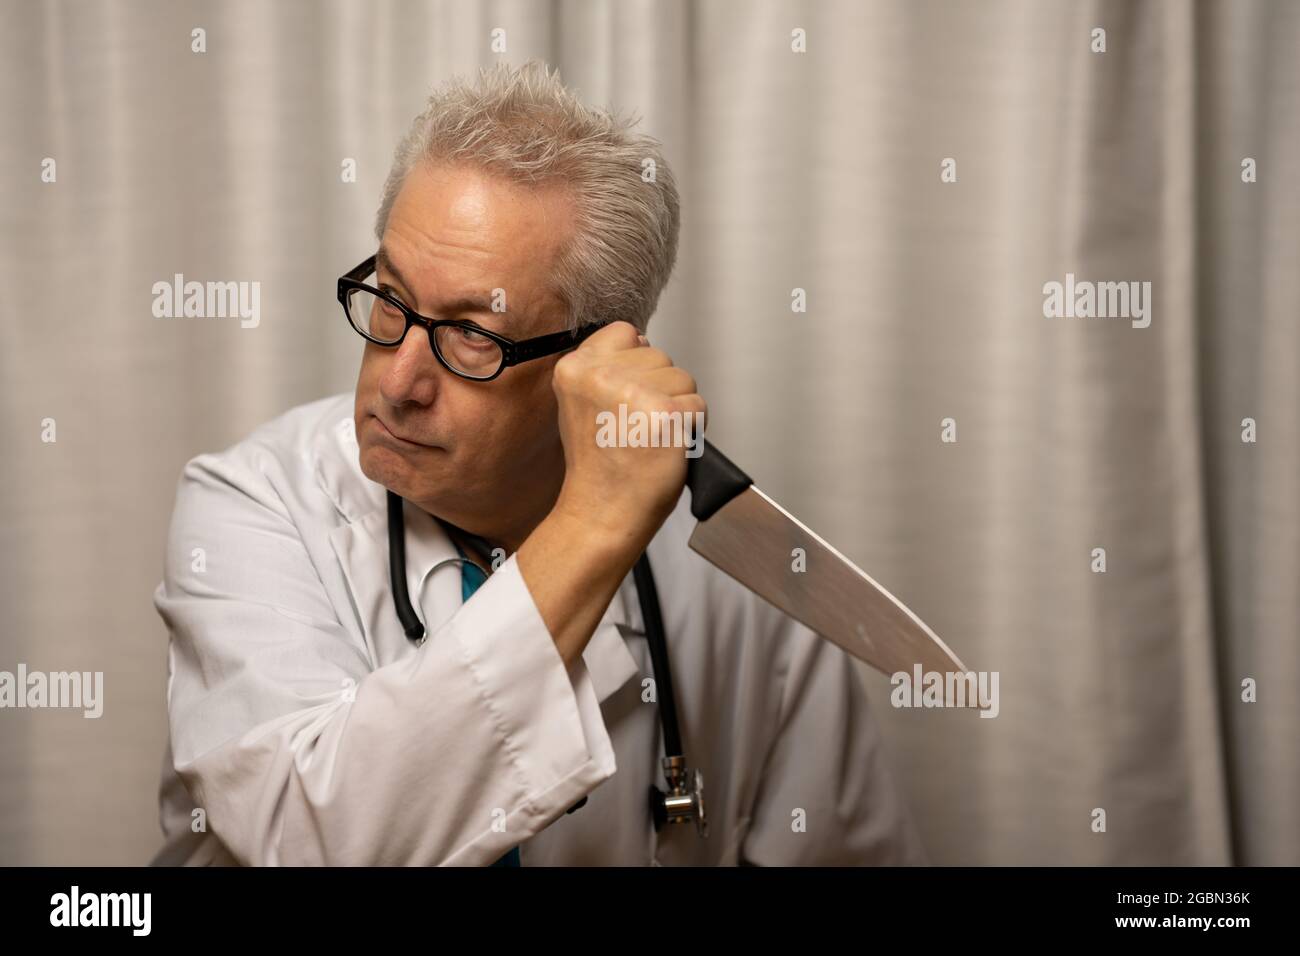 Evil medical doctor holding knife in hand to murder his patients Stock Photo